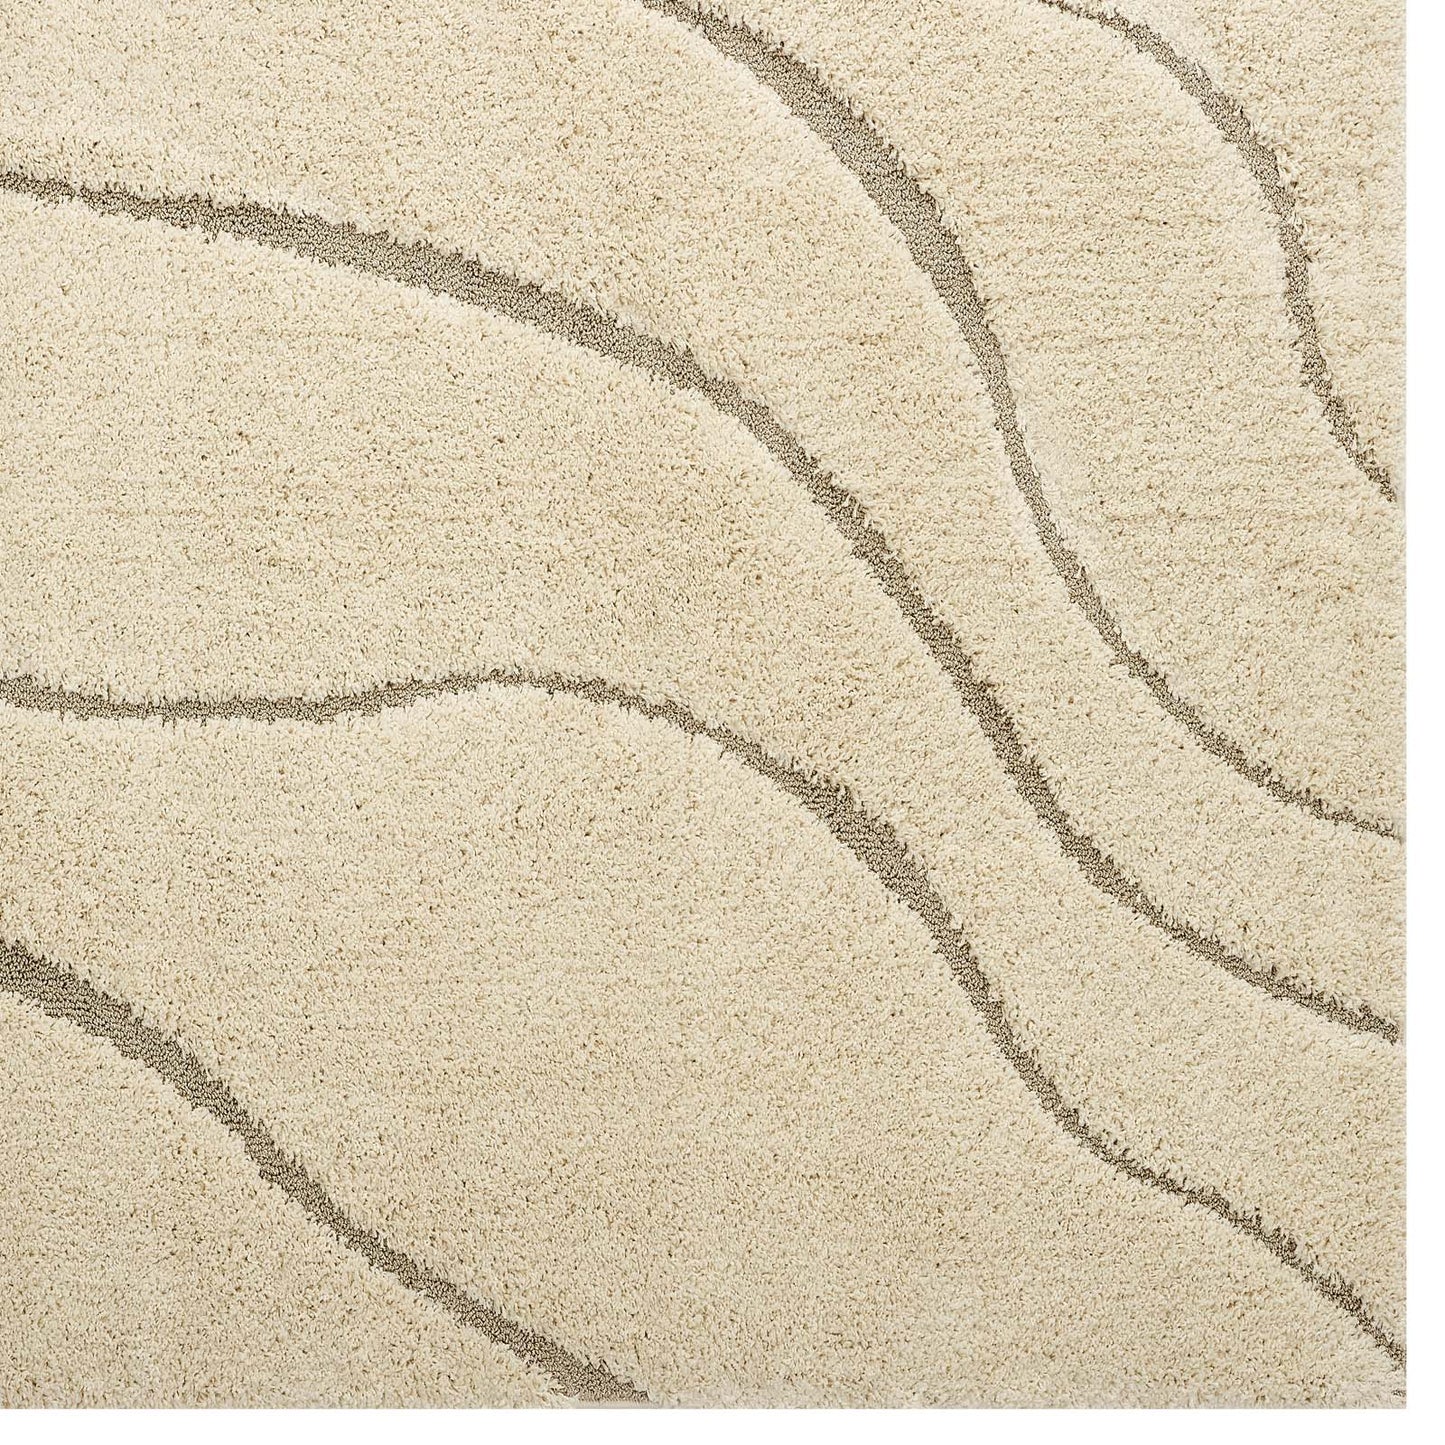 Jubilant Abound Abstract Swirl Shag 5x8 Area Rug